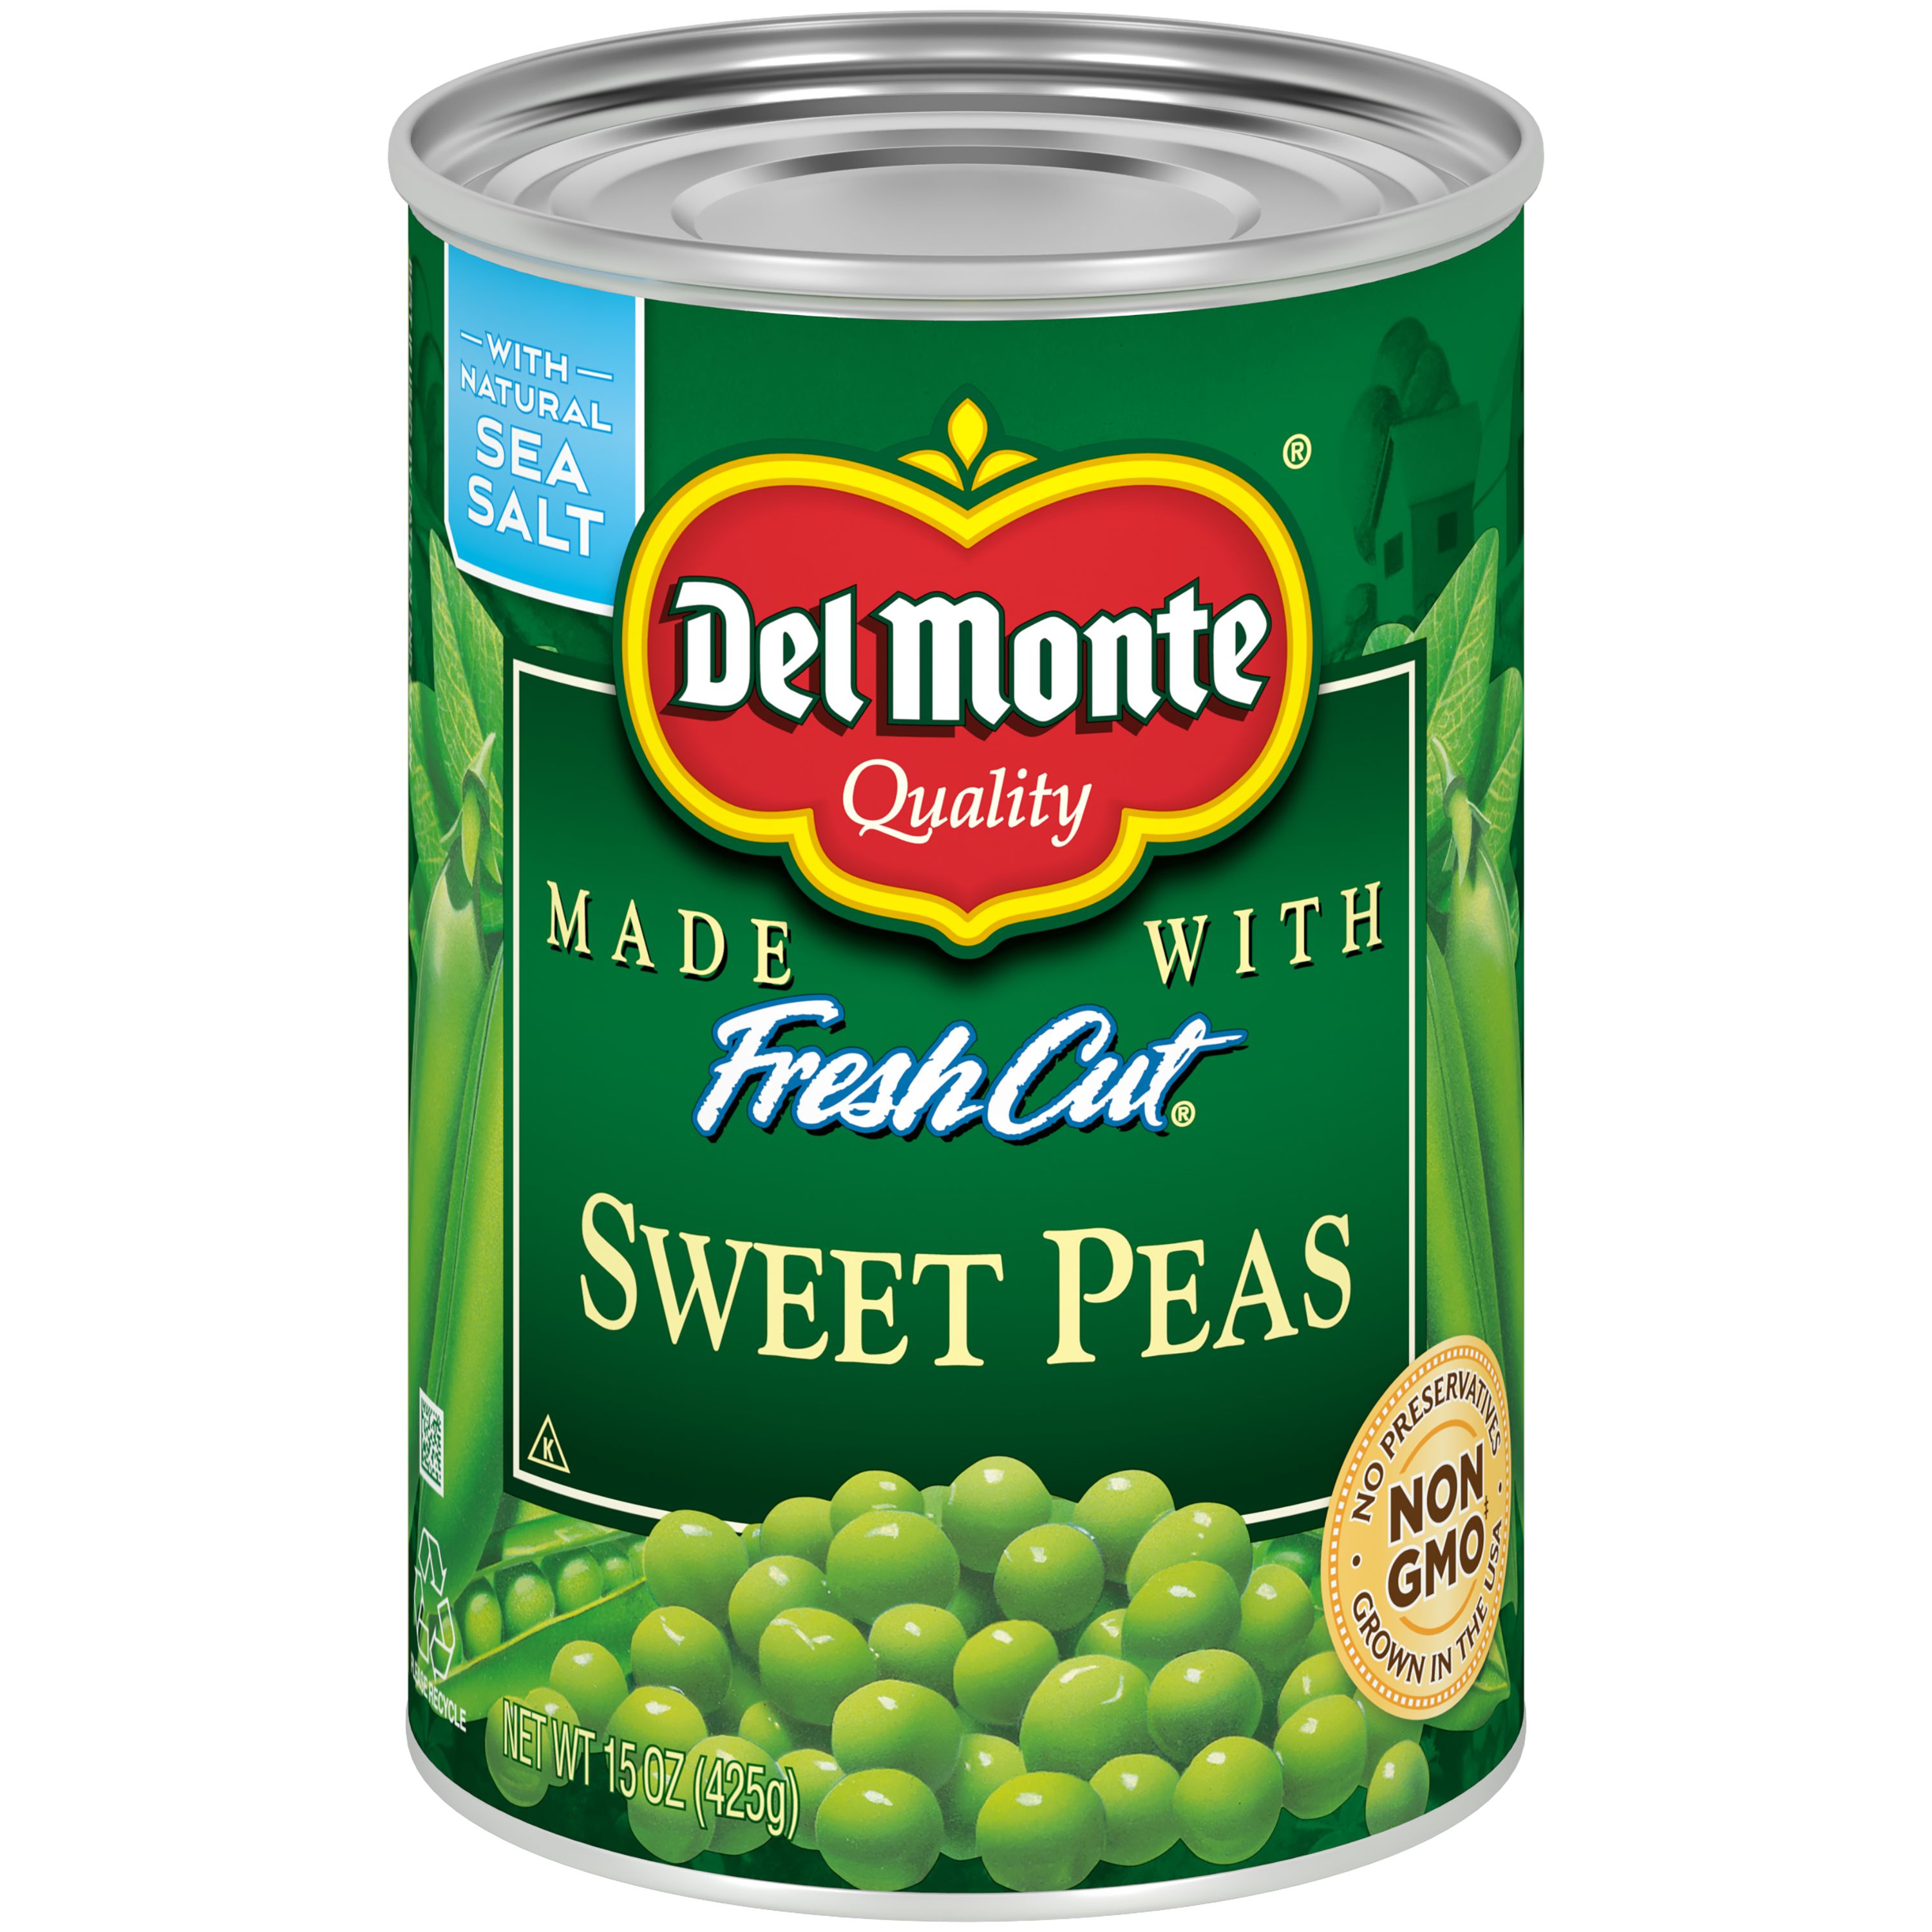 Del Monte Canned Sweet Peas, 15-Ounce